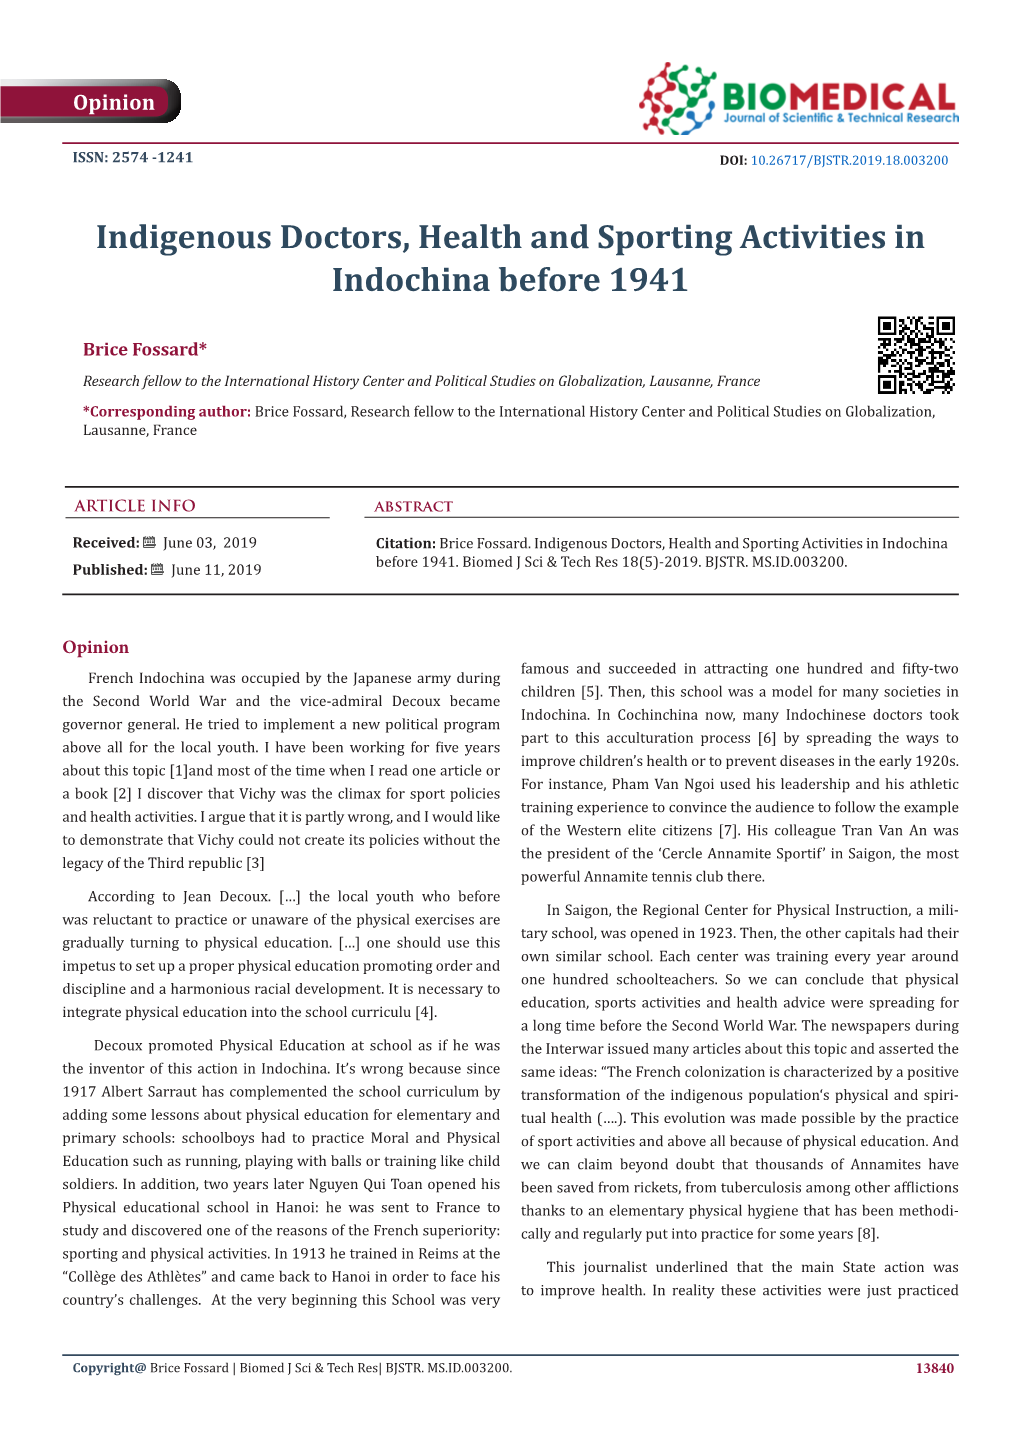 Indigenous Doctors, Health and Sporting Activities in Indochina Before 1941